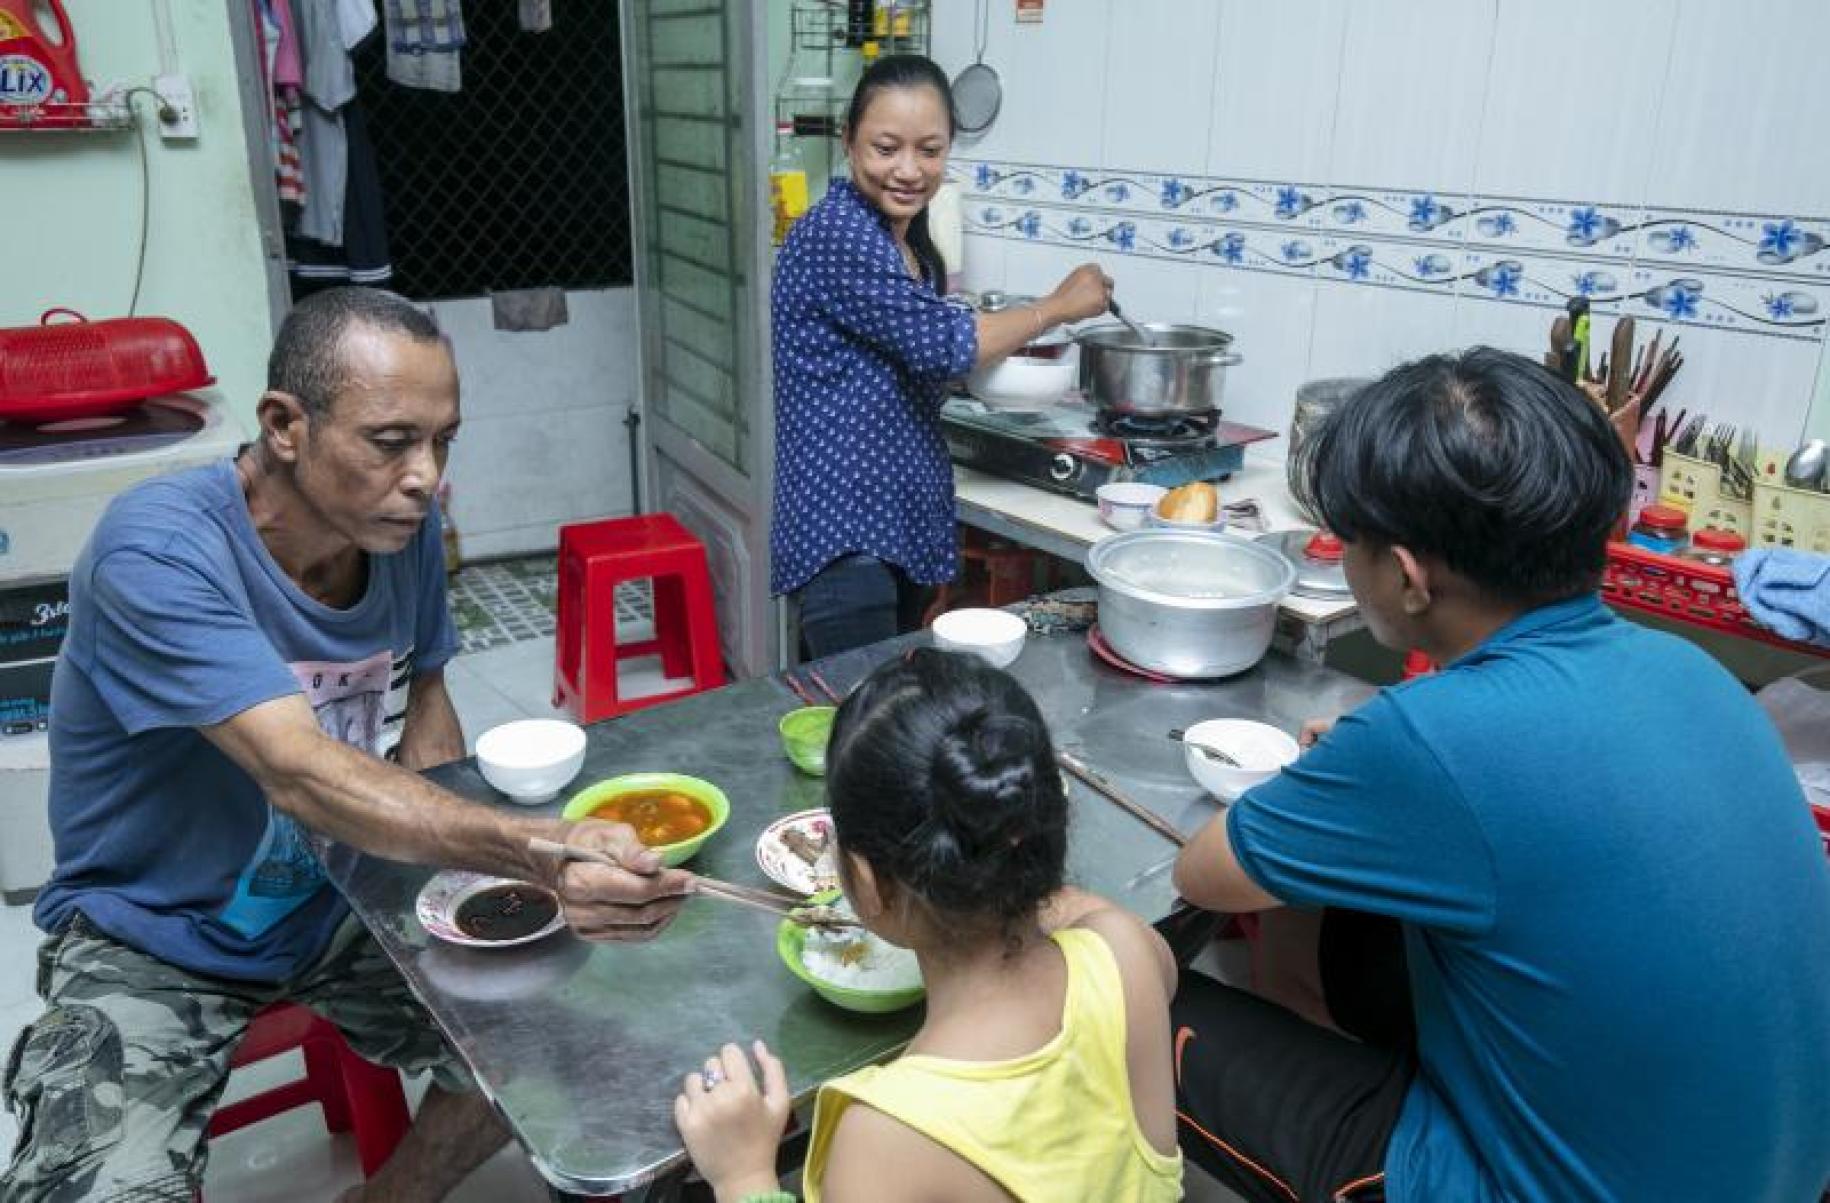 Shows Shows the family in the kitchen. Chau Bao, Ben Tre cooks dinner, while looking happily at her family sitting at the dinner table eating.